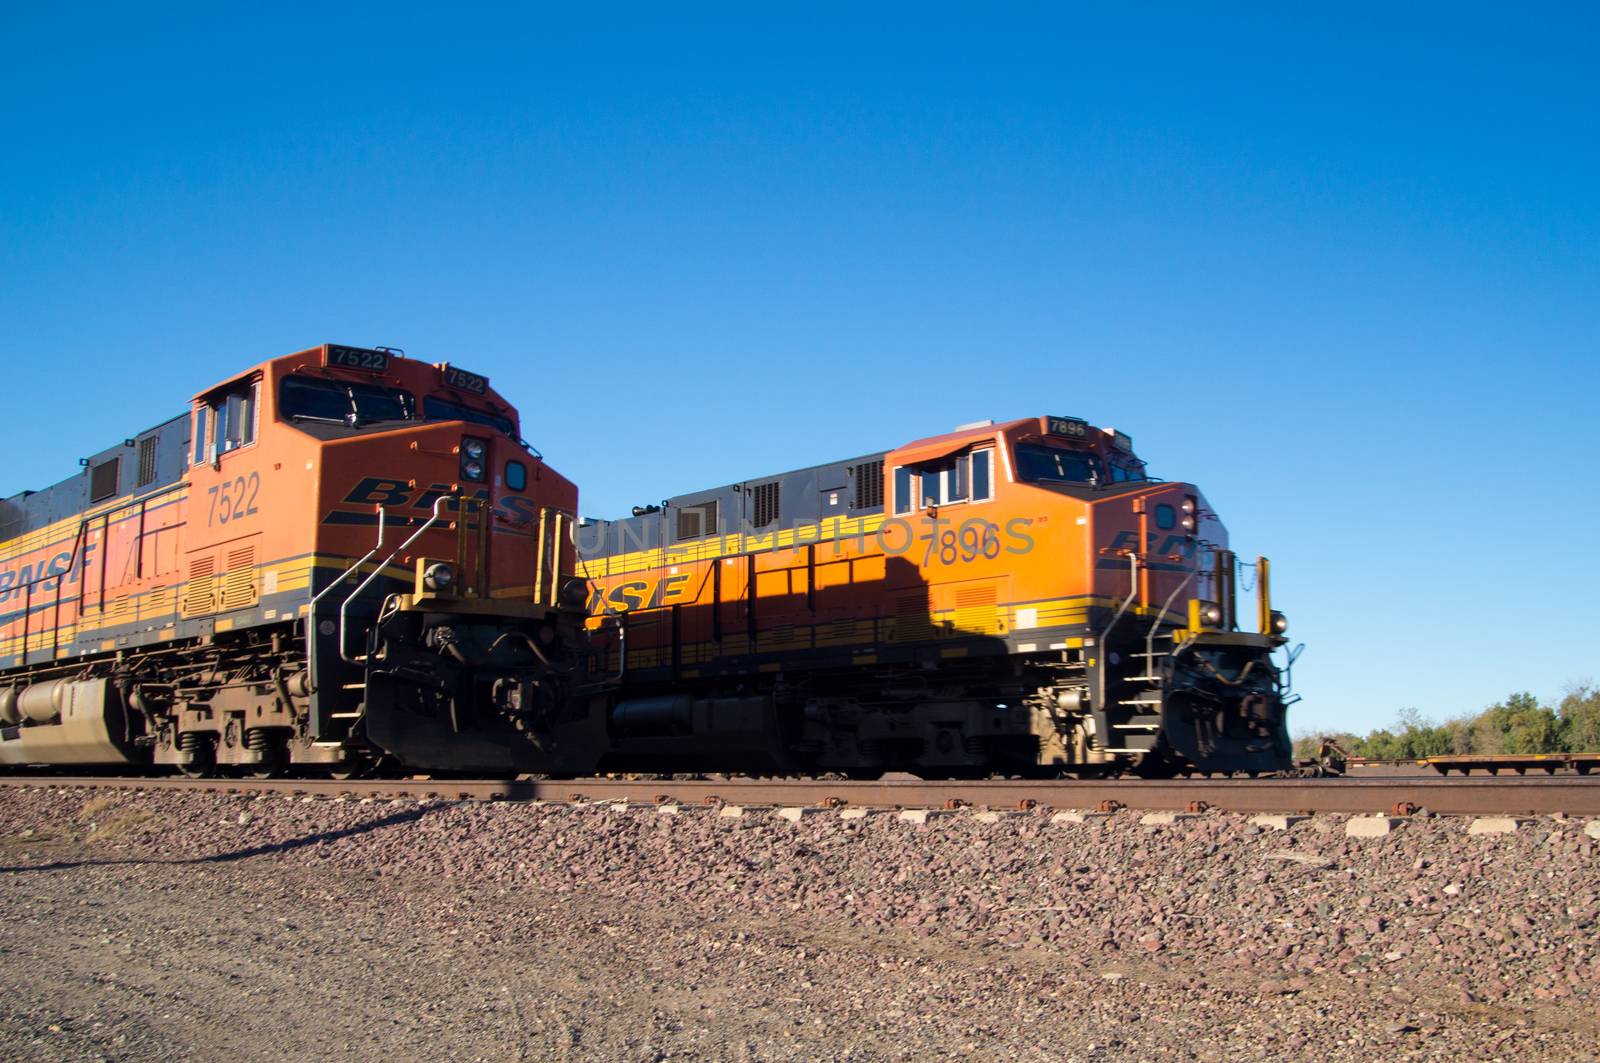 Ready, Get Set and GO for two BNSF Freight Train Locomotives No. by emattil